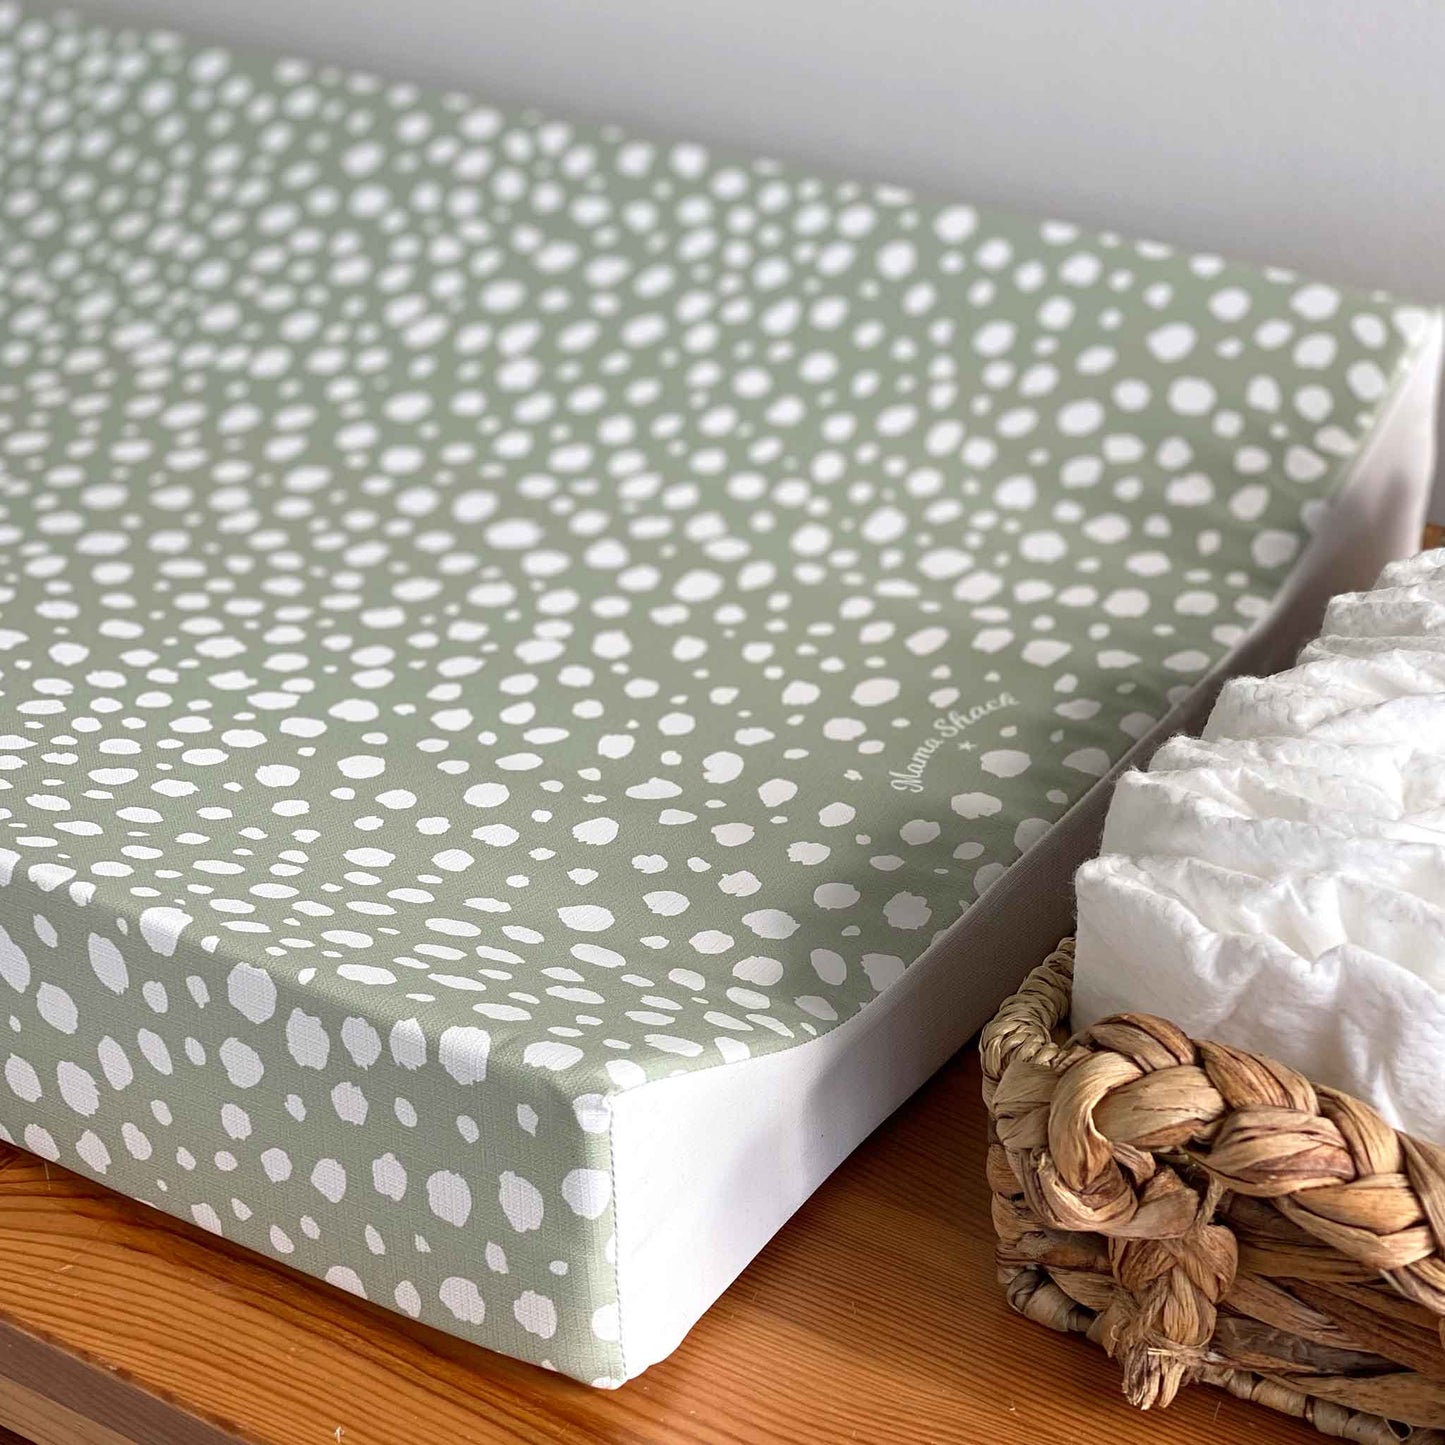 Alf & Co is a midlands children’s store and is stockist of the Mama Shack Anti Roll Changing Mat in the Sage Dotty Print 